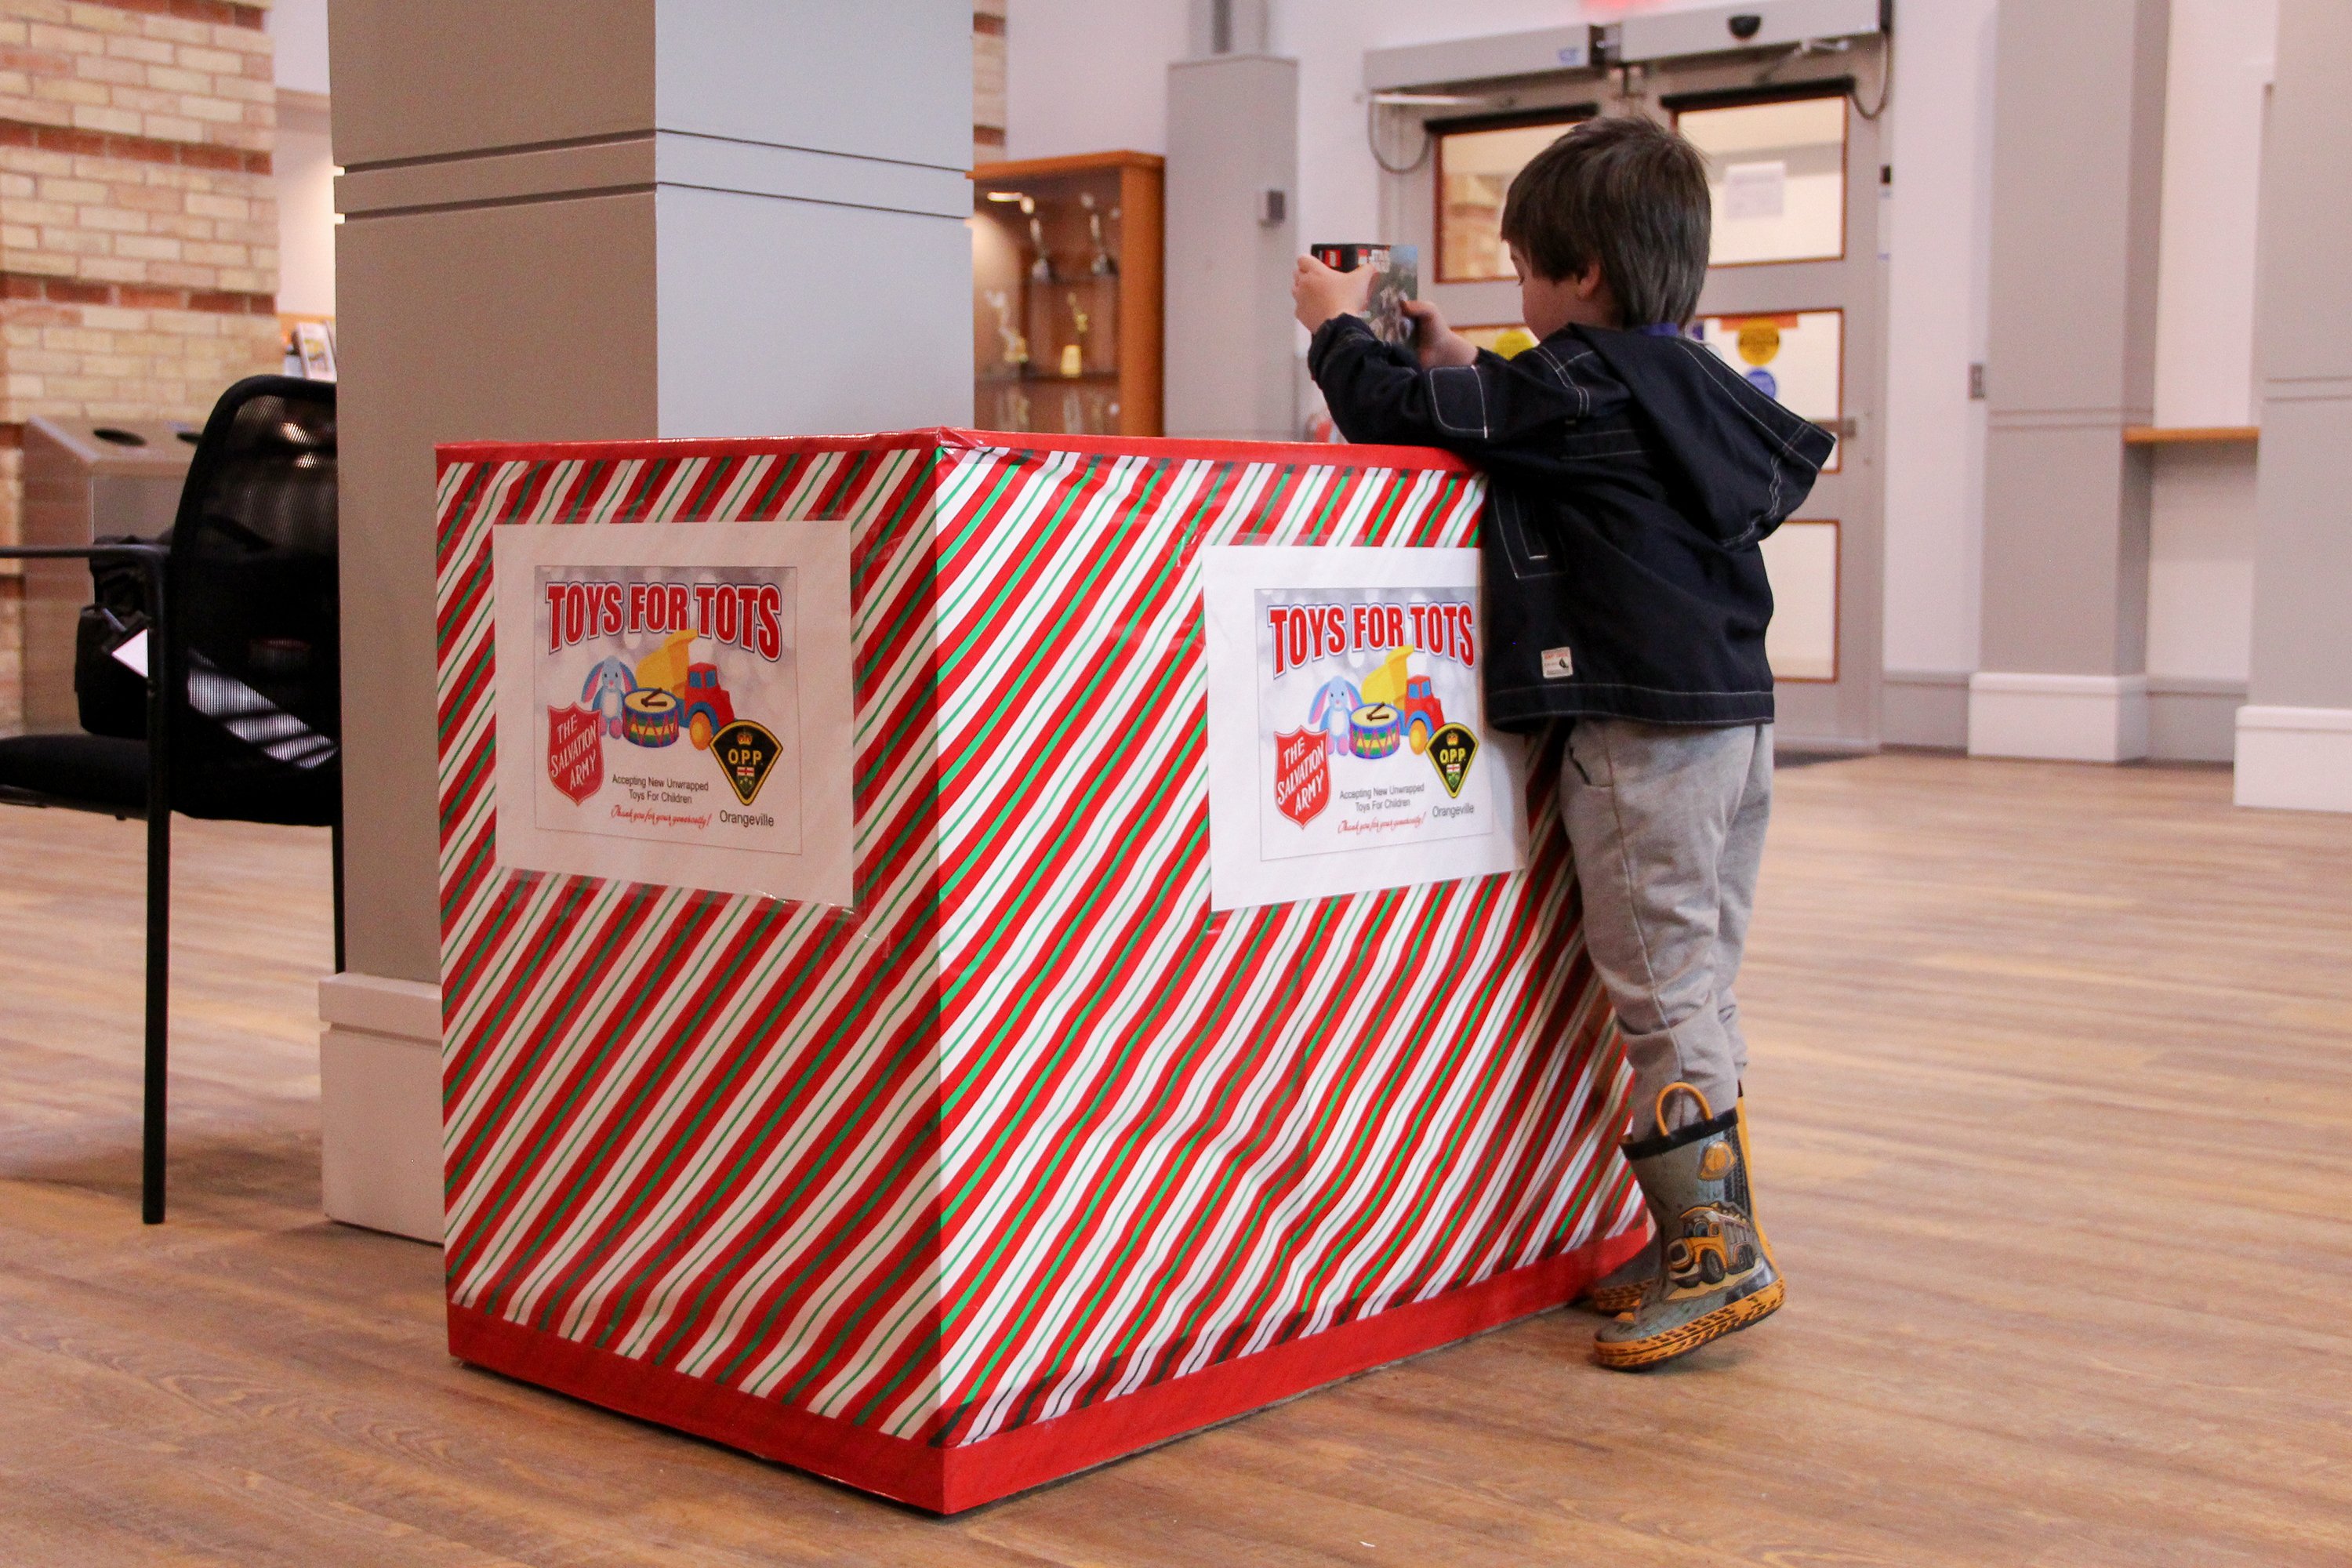 A child drops a toy donation in a Toys for Tots donation box